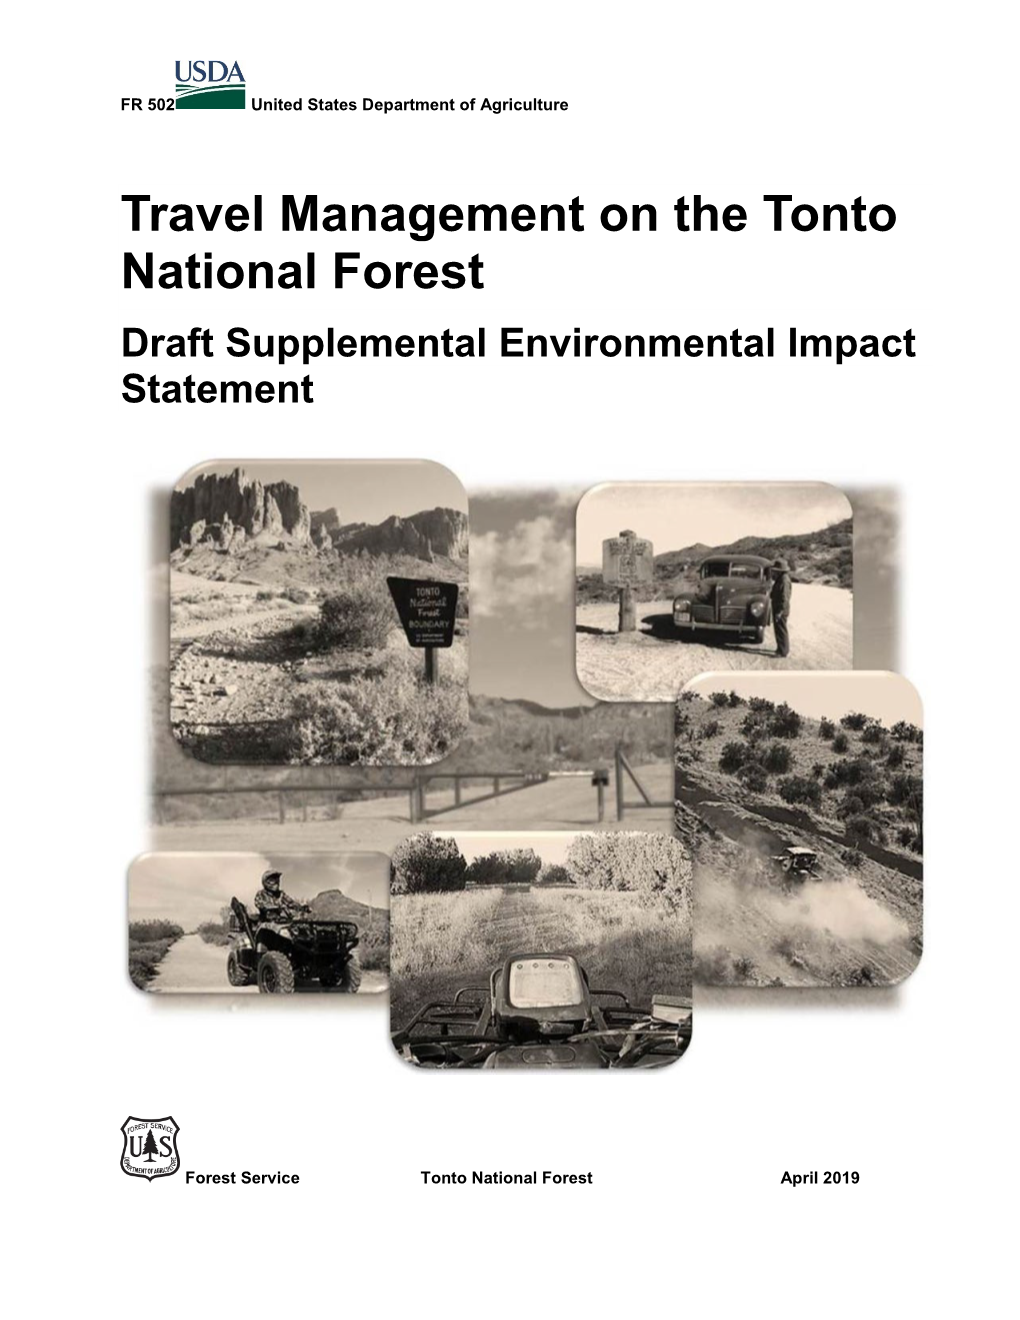 Travel Management on the Tonto National Forest Supplemental